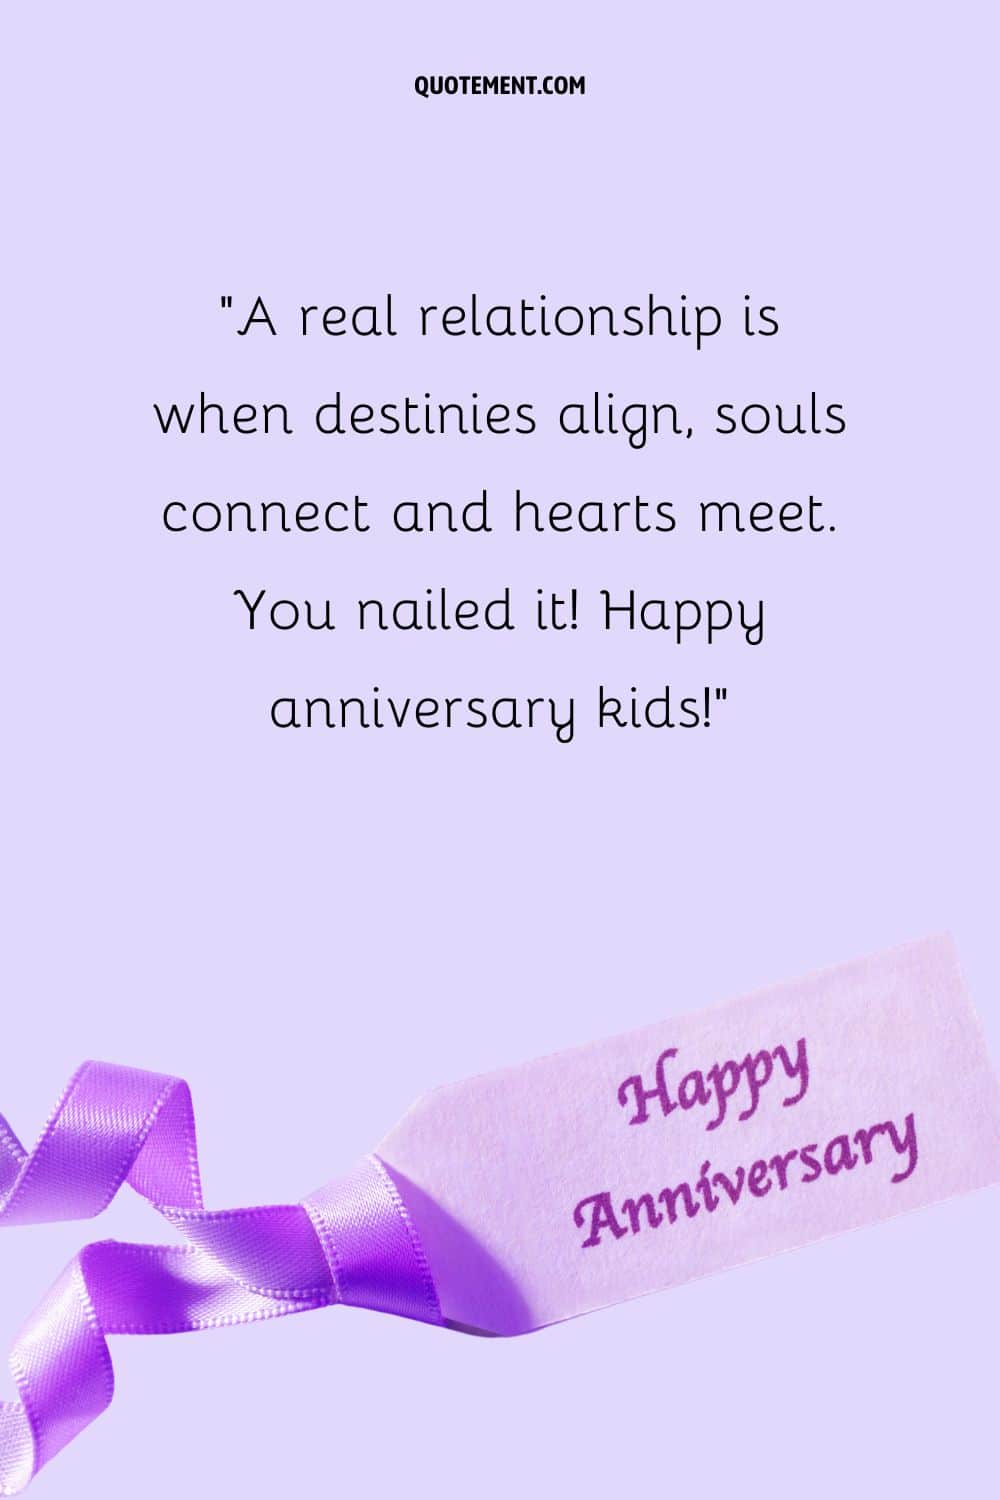 anniversary note with purple ribbon
